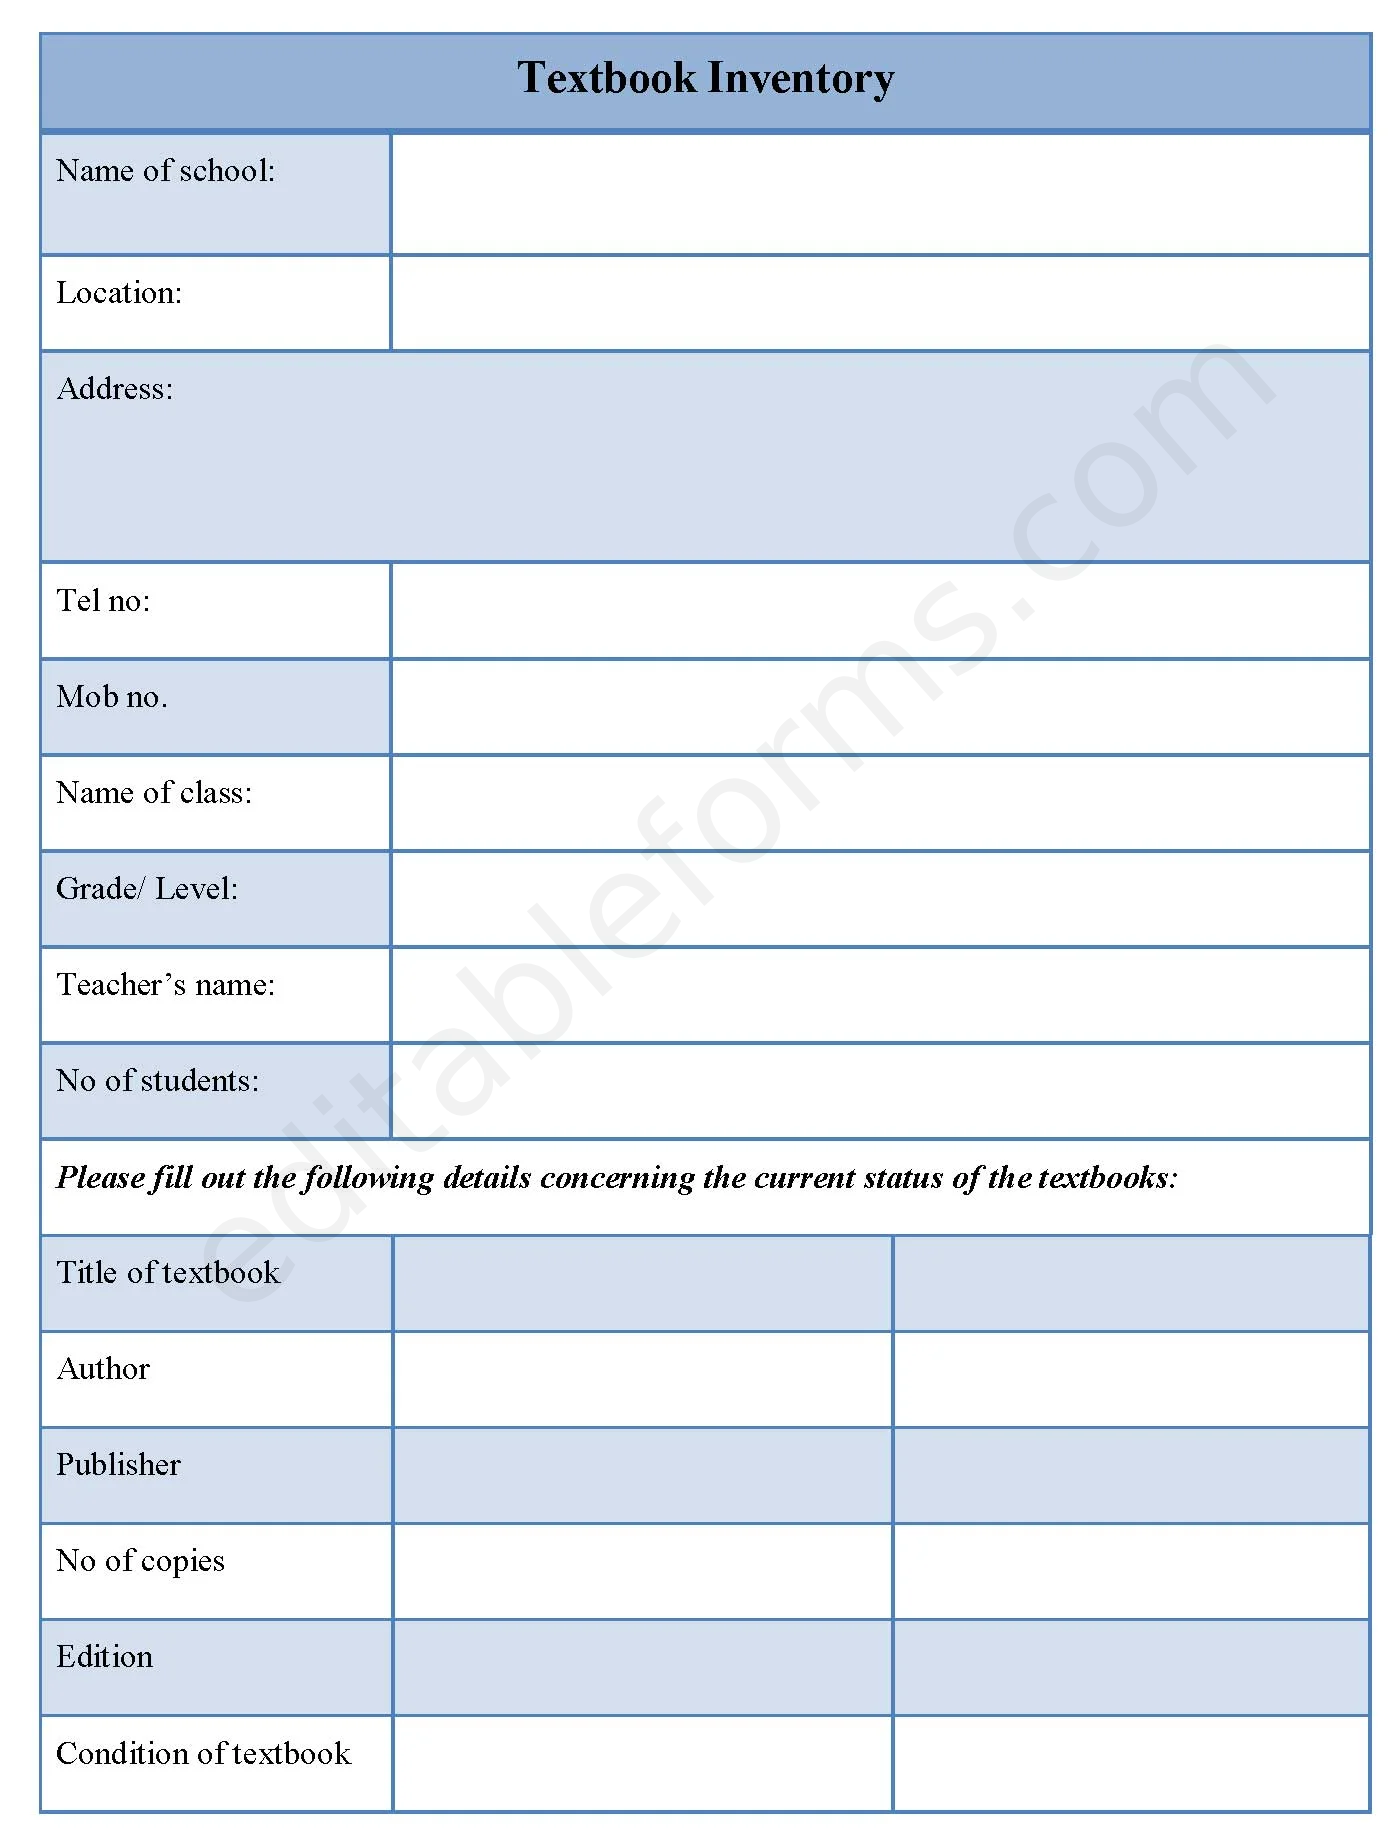 Textbook Inventory Fillable PDF Template